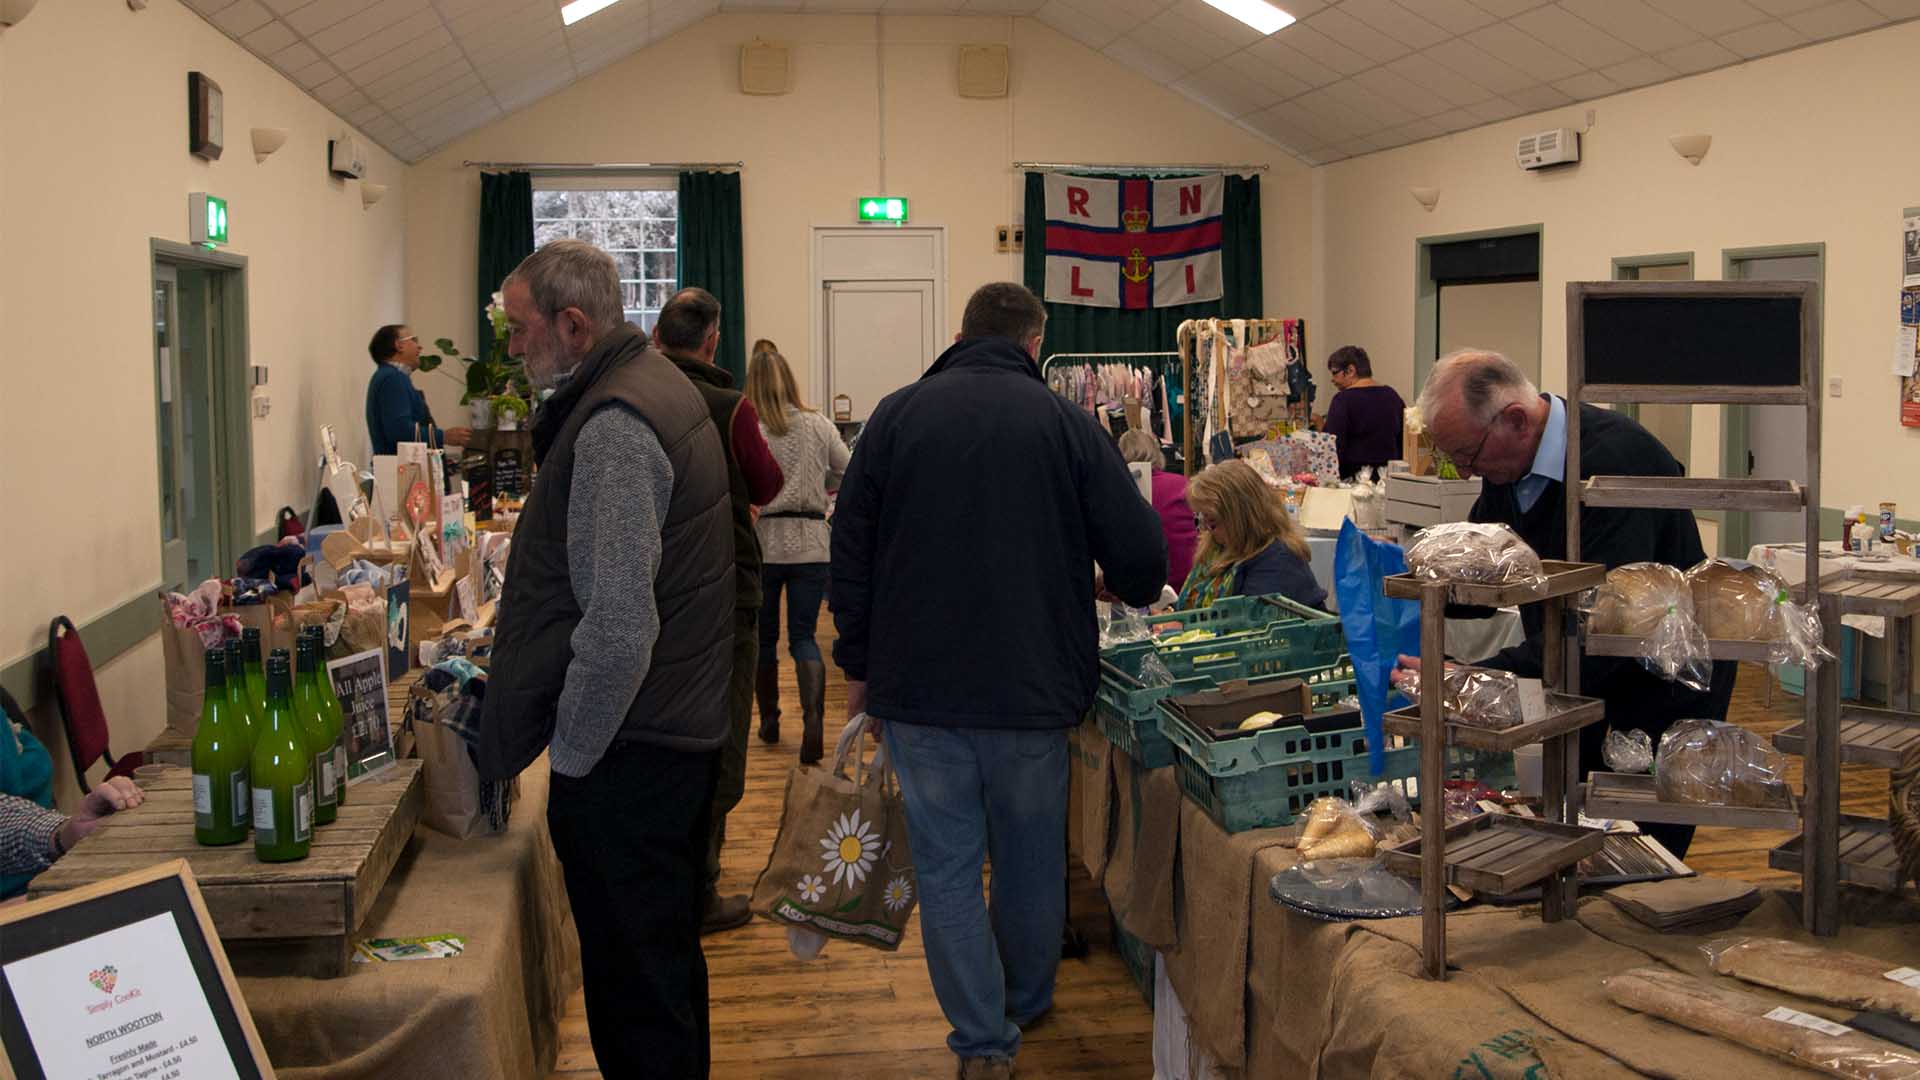 North Wootton Village Market, North Wootton Village Hall, Priory Lane, North Wootton, Norfolk PE30 3PT | Taking place on the third Saturday of every month, North Wootton Village Market is the place to find fresh produce from local suppliers alongside hand-crafted products, as well as being able to meet the producers and makers behind them. | Farmer's Market, Market, Local Produce, Fresh food, local food, artisan